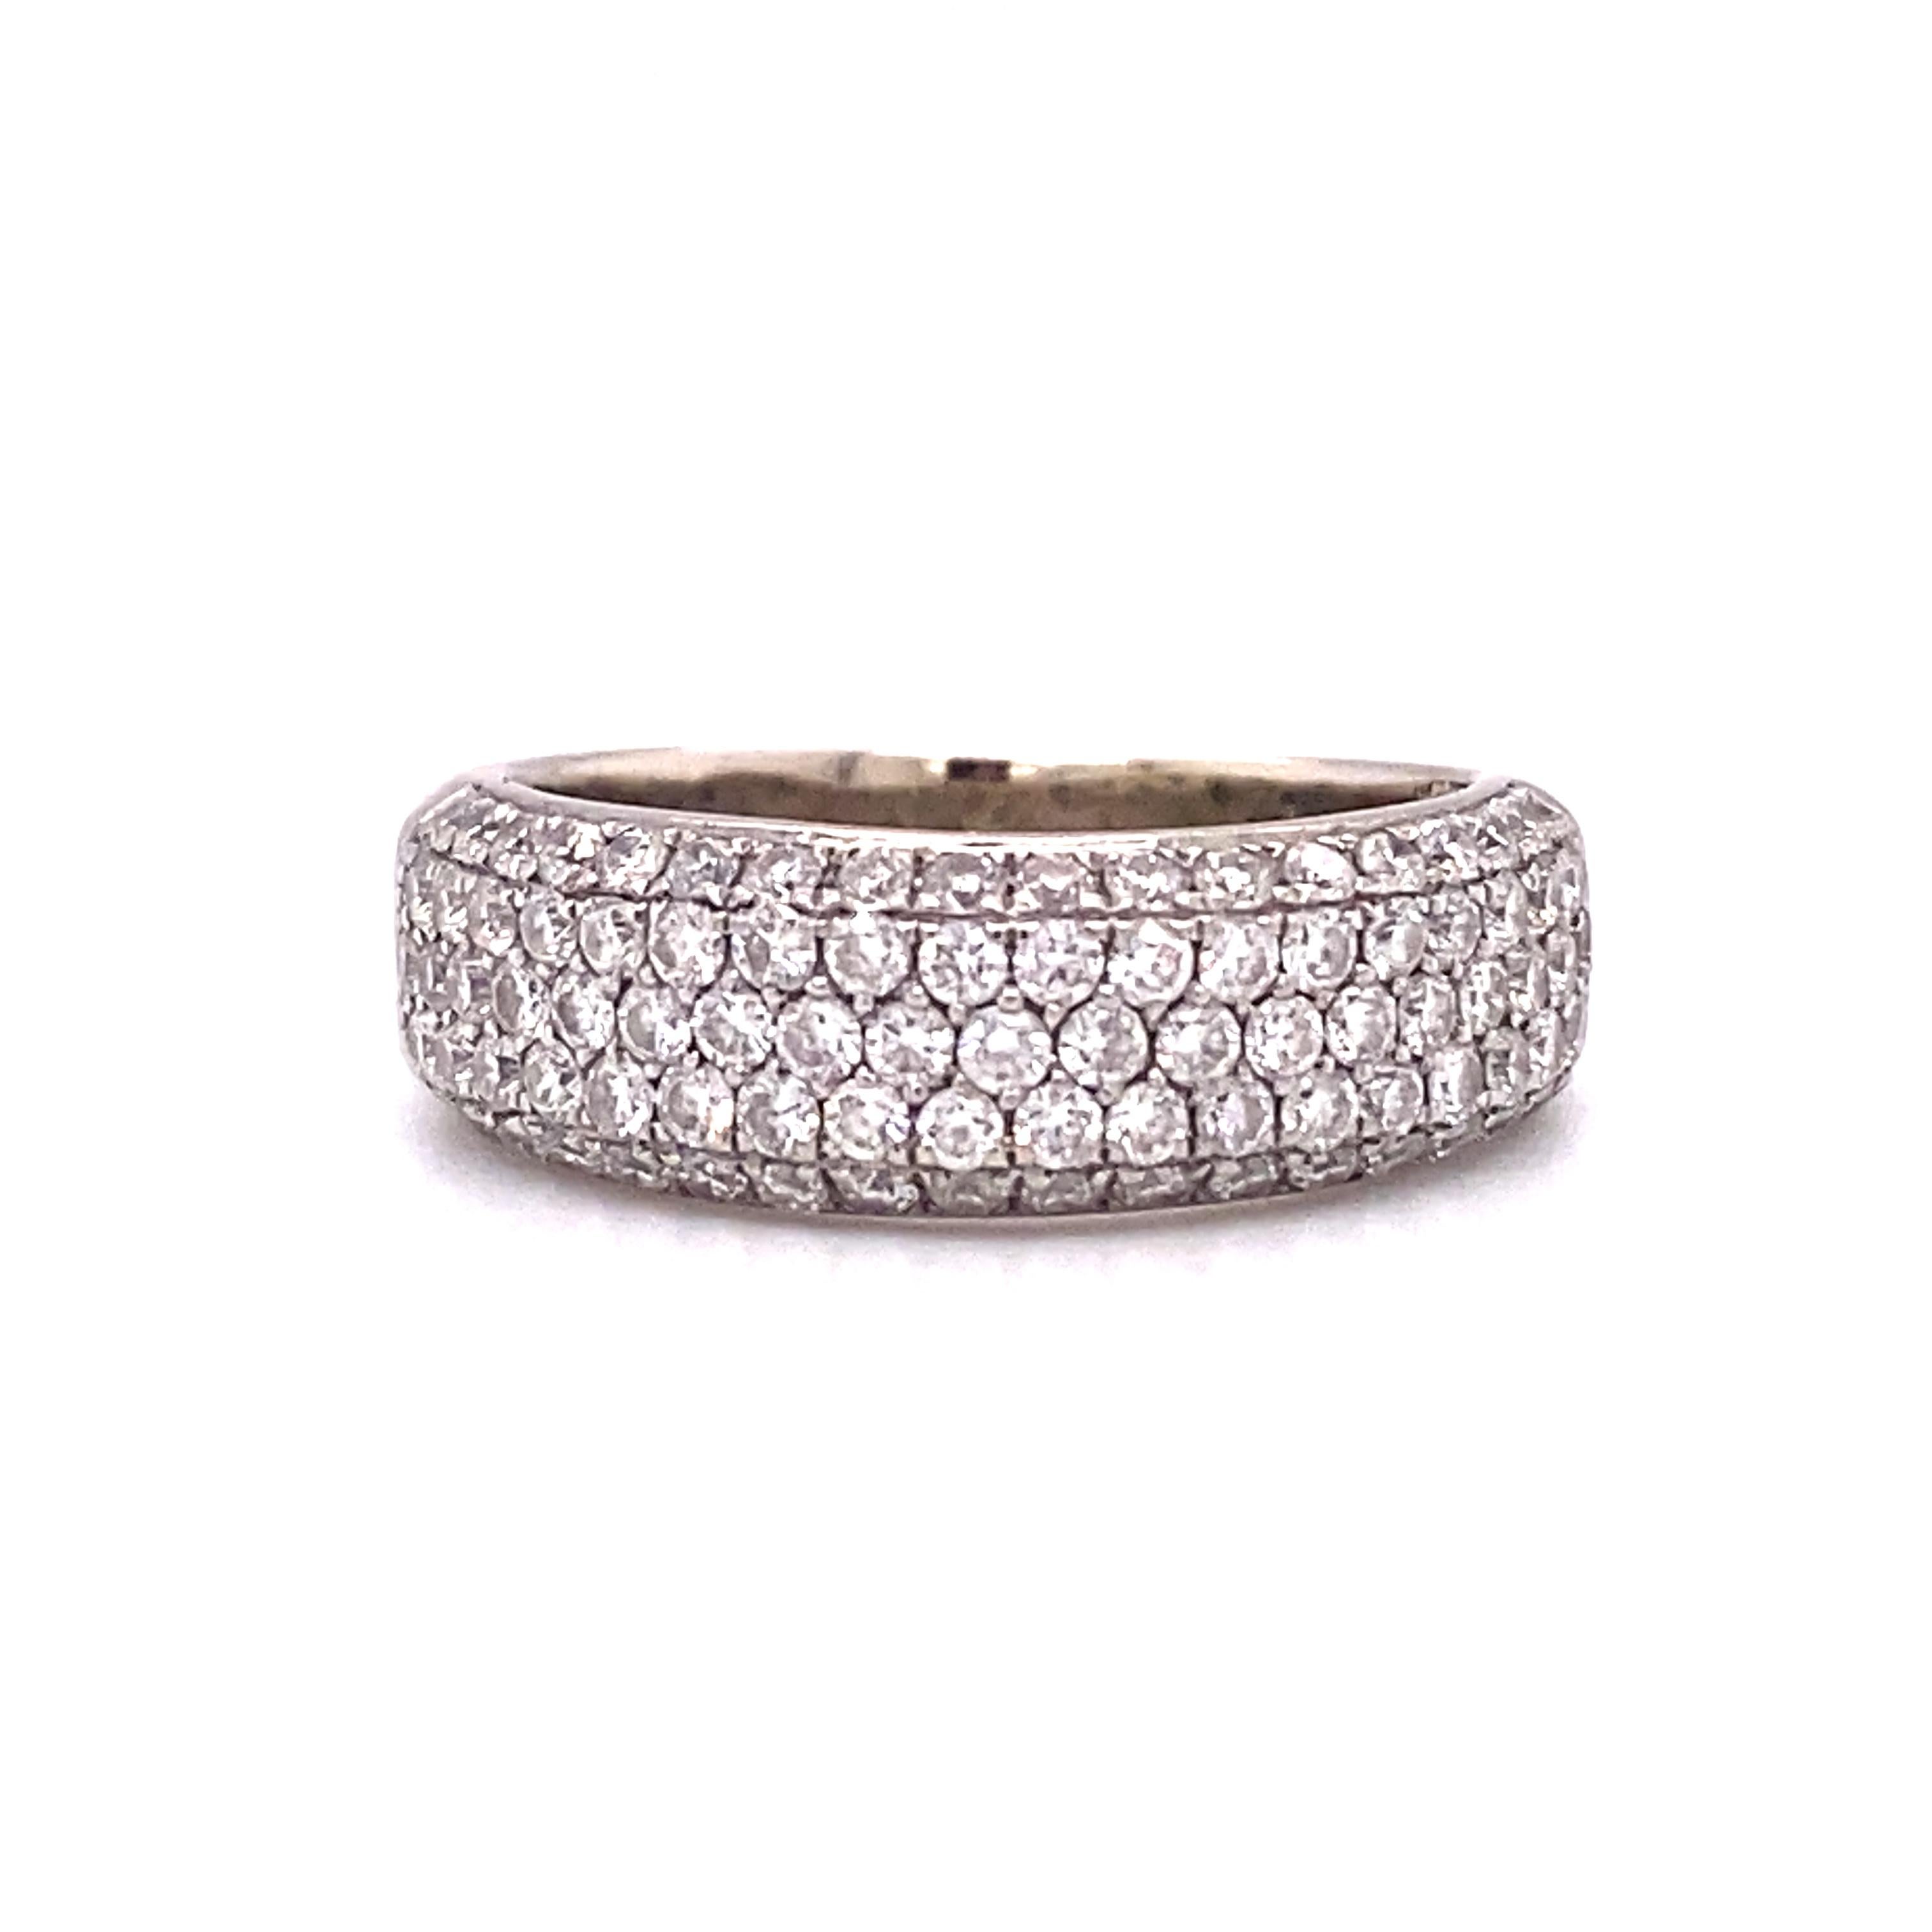 Circa 2000s 1.25 Carat Total Weight Diamond Five Row Band in 14 Karat White Gold For Sale 1